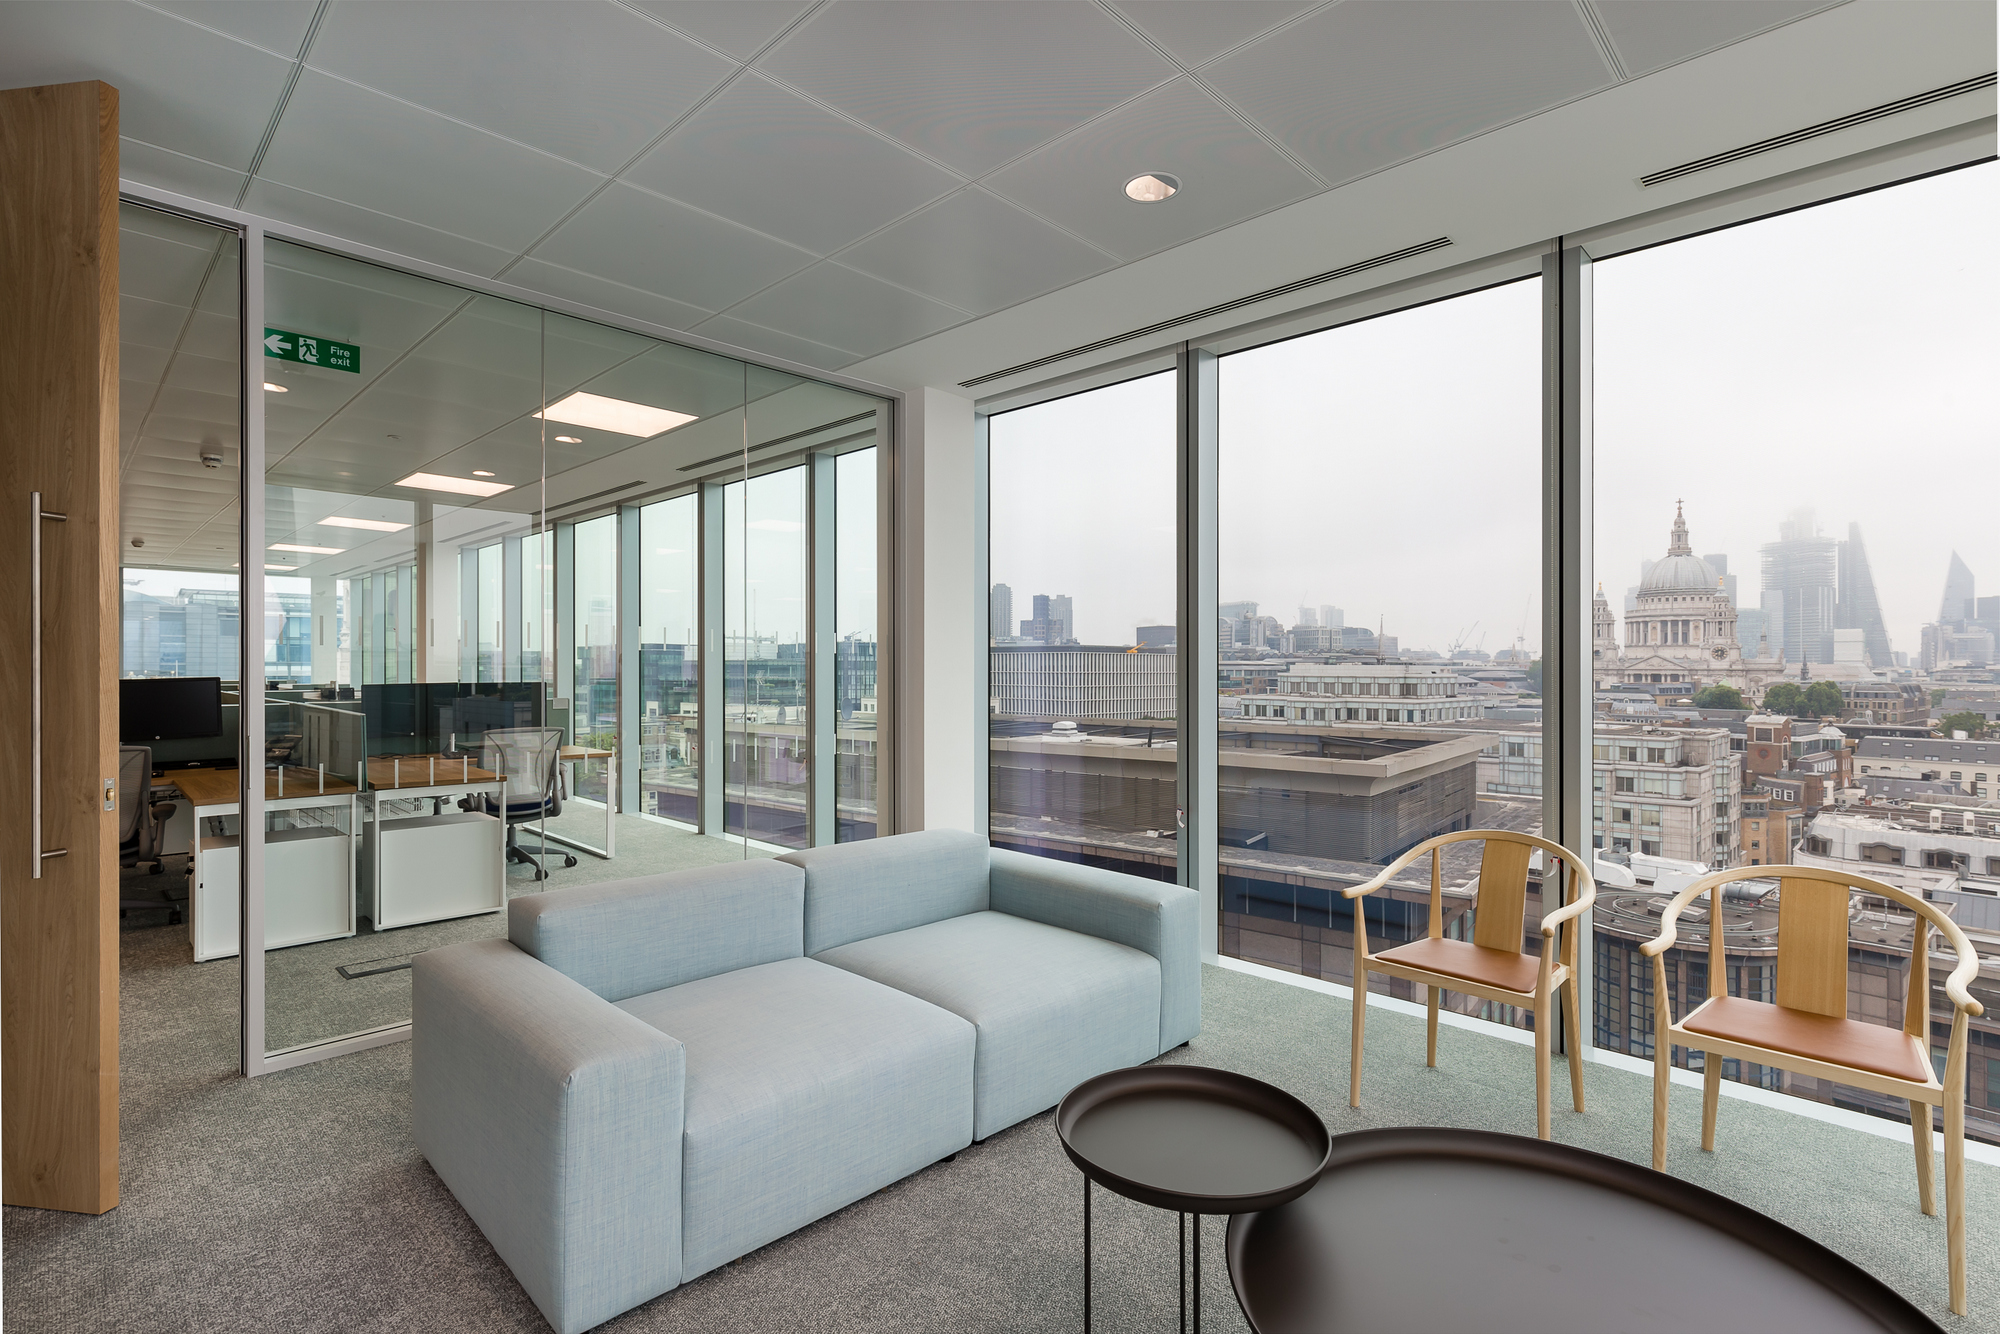 Berkeley Research Group Offices - London | Office Snapshots